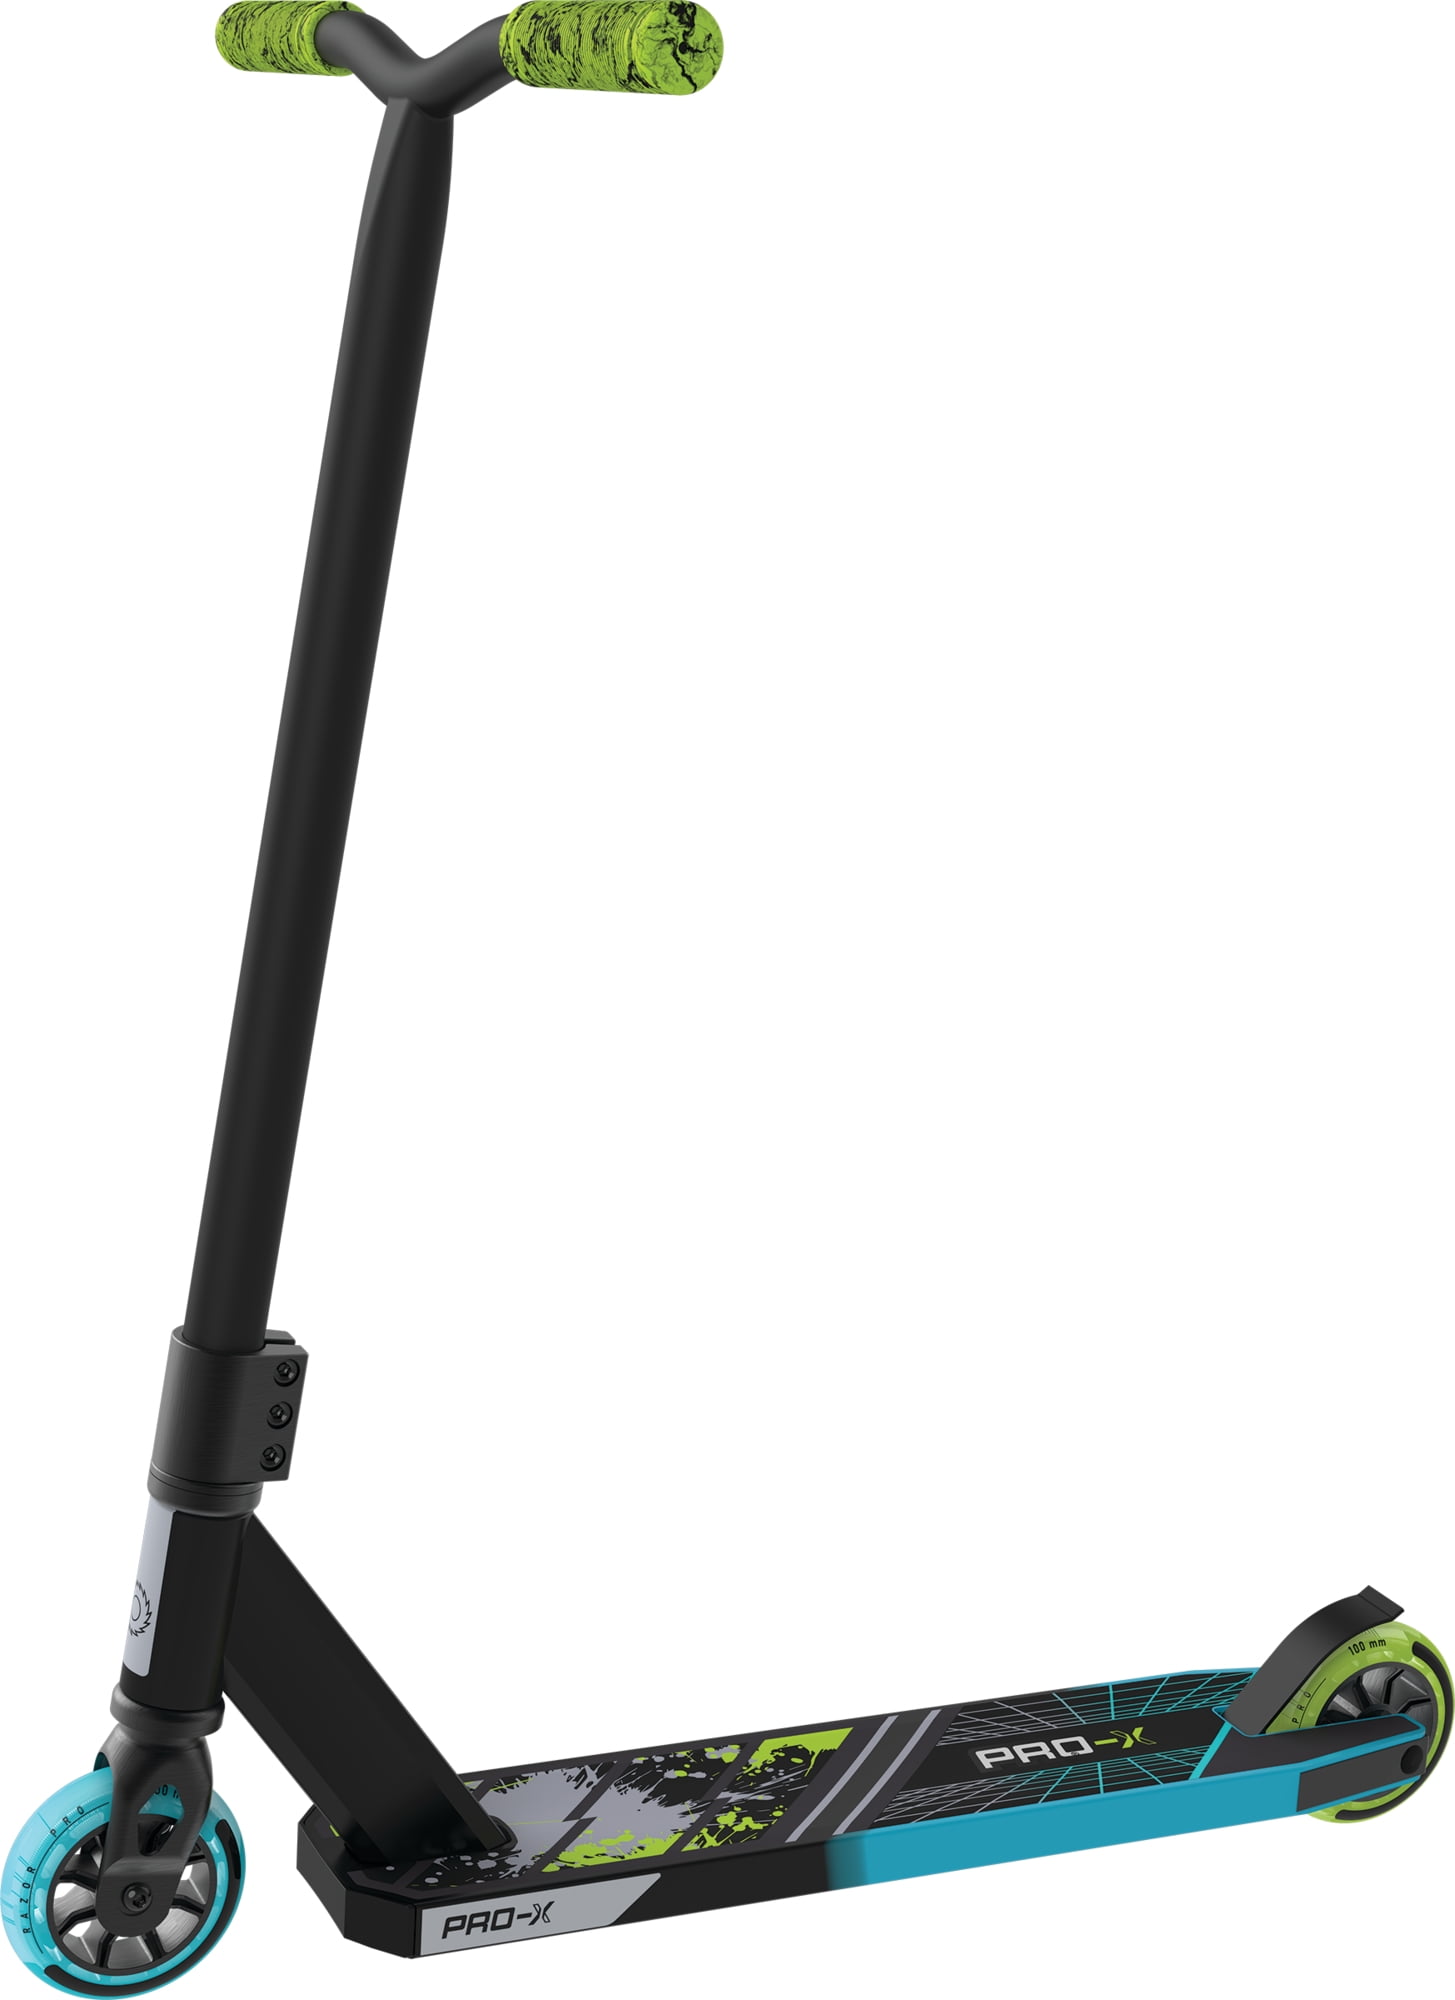 Razor Pro X Stunt Scooter 100 mm Performance Wheels, Aluminum Deck with Boxed Edges, Customizable Grip Tape, Professional Quality Trick Scooter for Kids and Teens - Walmart.com